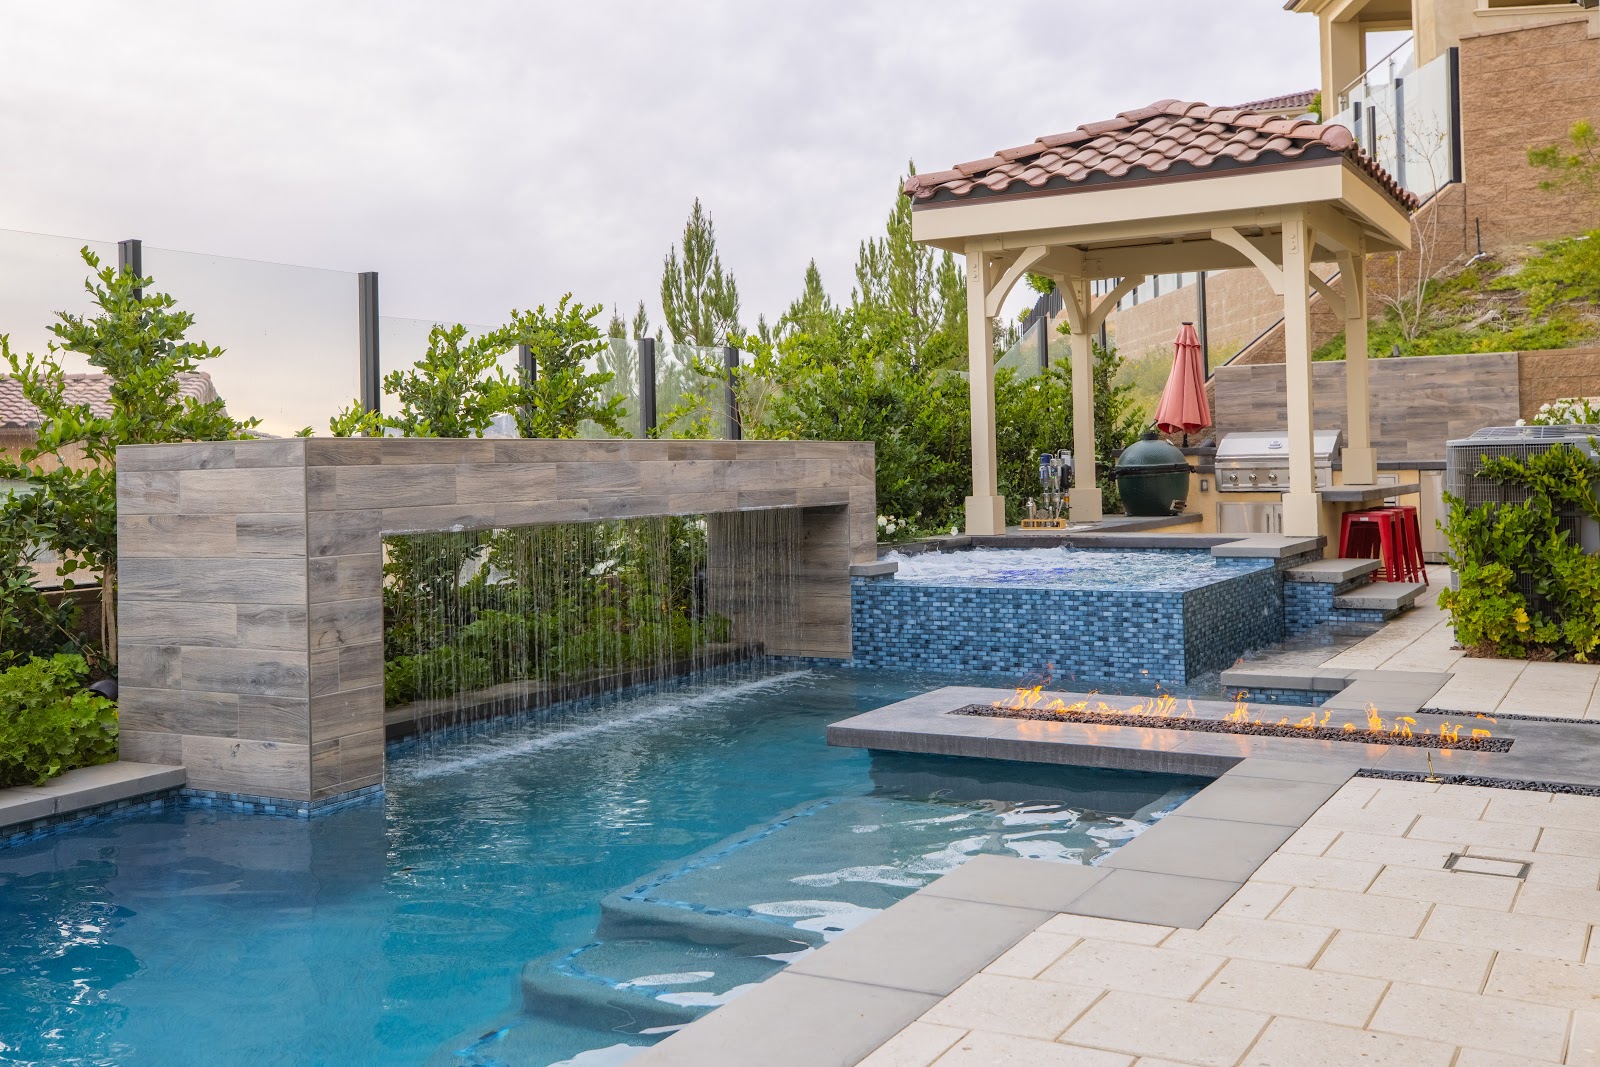 Contemporary pool design with waterfall feature and perimeter overflow spa